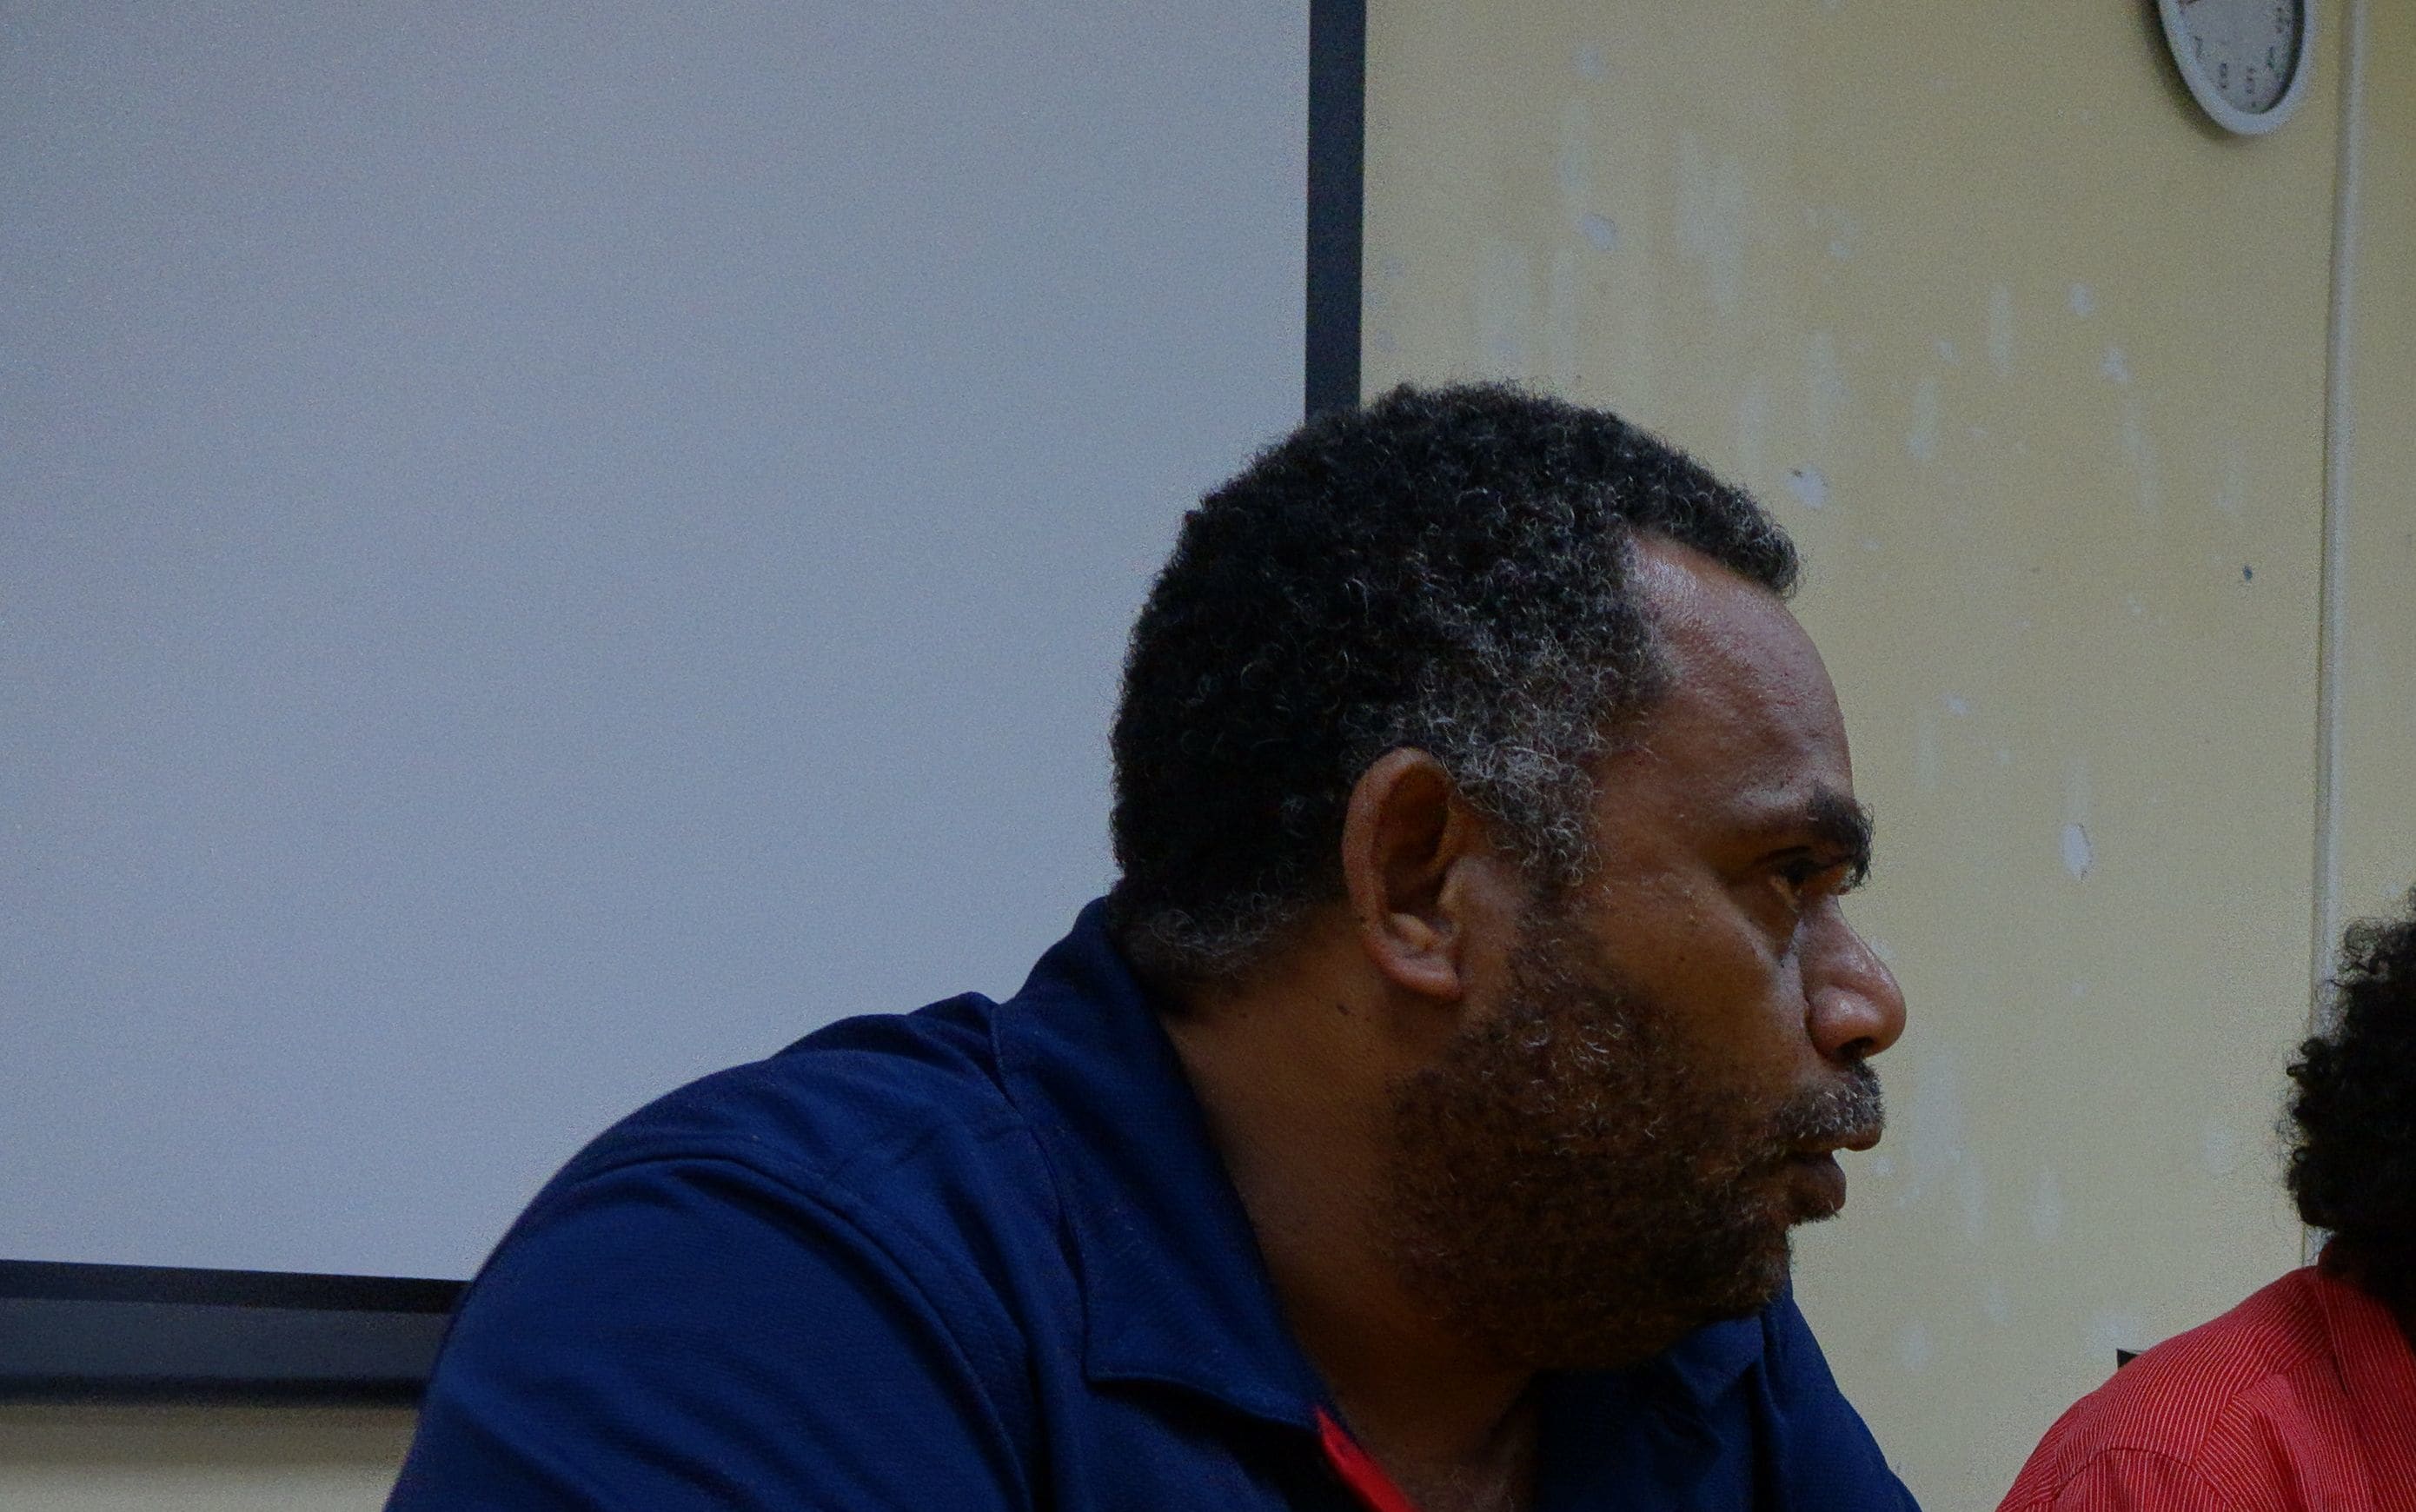 From left to right - Director General of the Vanuatu Ministry of Climate Change, Jotham Napat and NDMO Technical Advisor Benjamin Shing speak to the press at one of the nightly briefings.